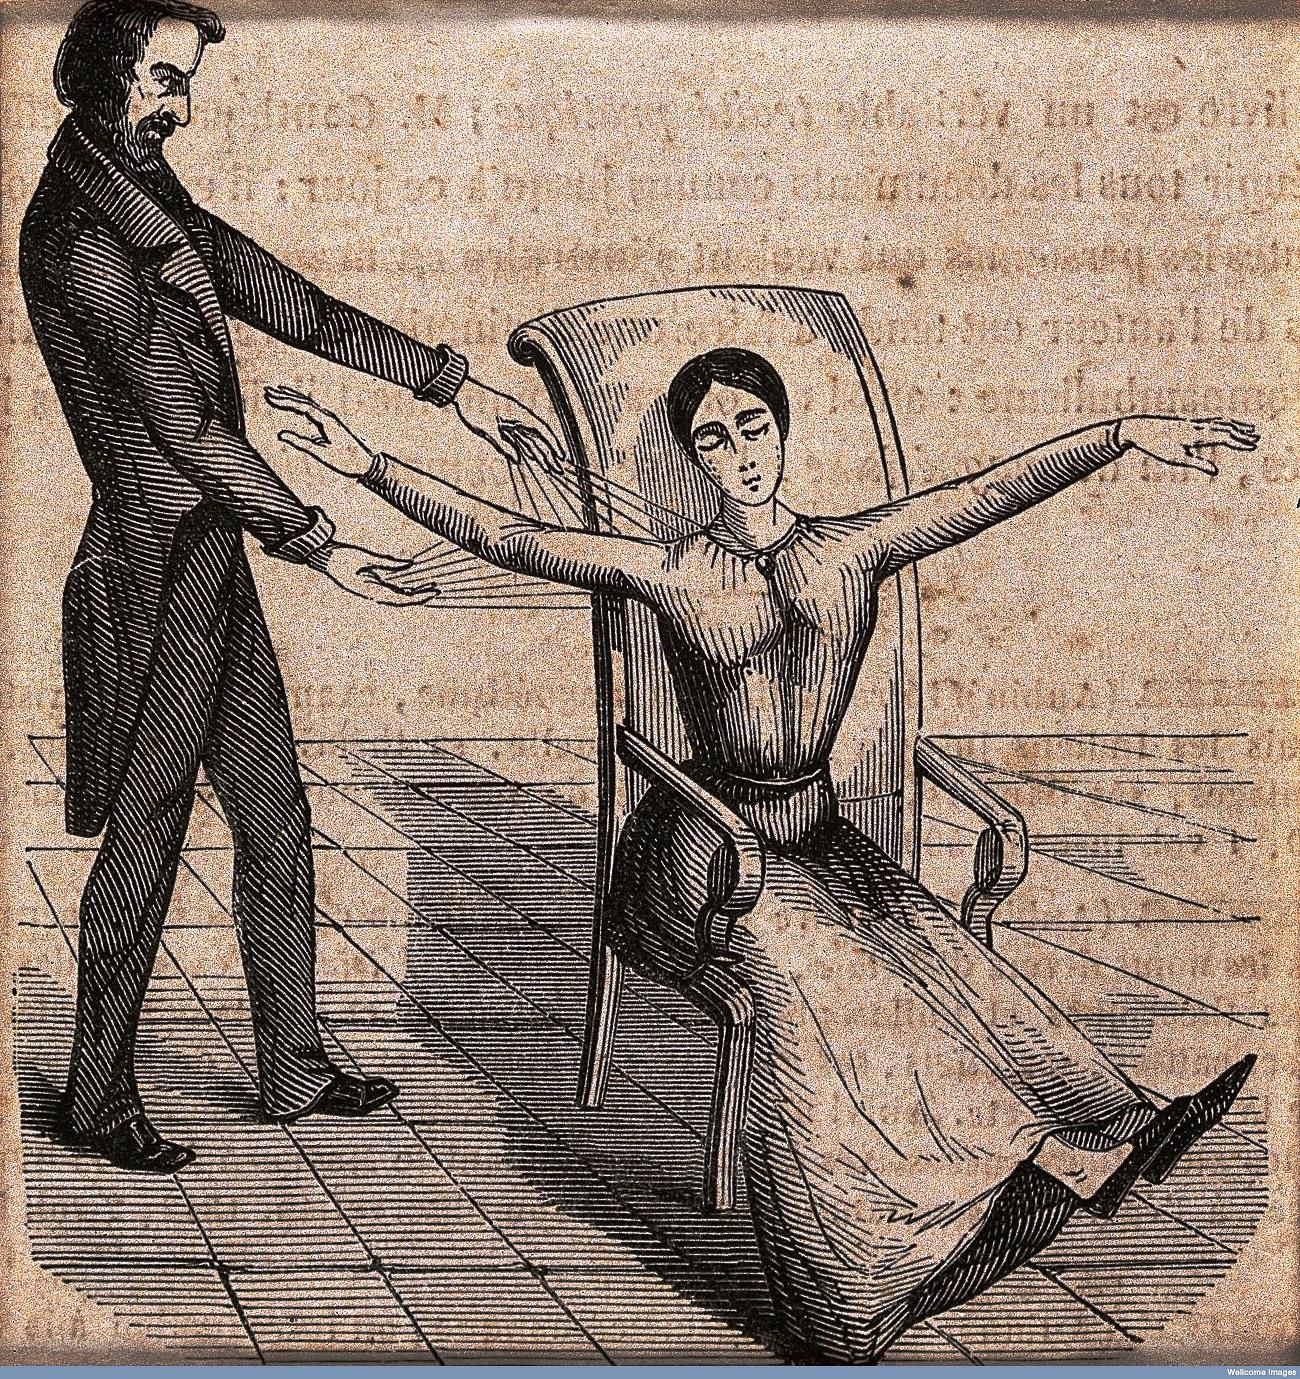 “A Mesmerist using Animal Magnetism on a woman who responds with convulsions”. Source: Wellcome Library, London.